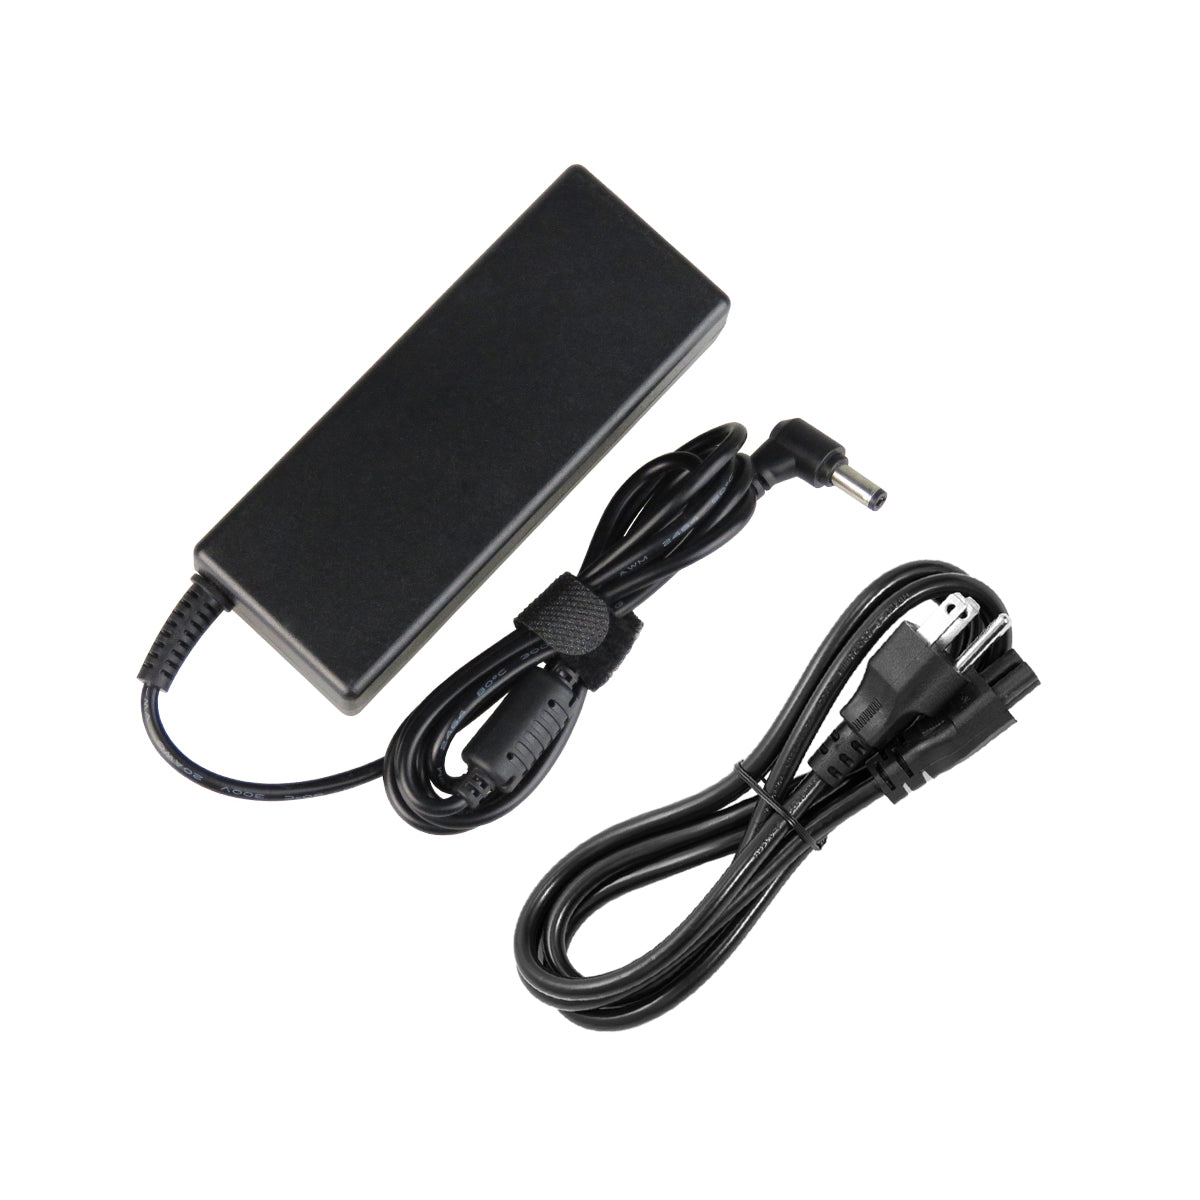 AC Adapter Charger for Toshiba Satellite c55t Notebook.